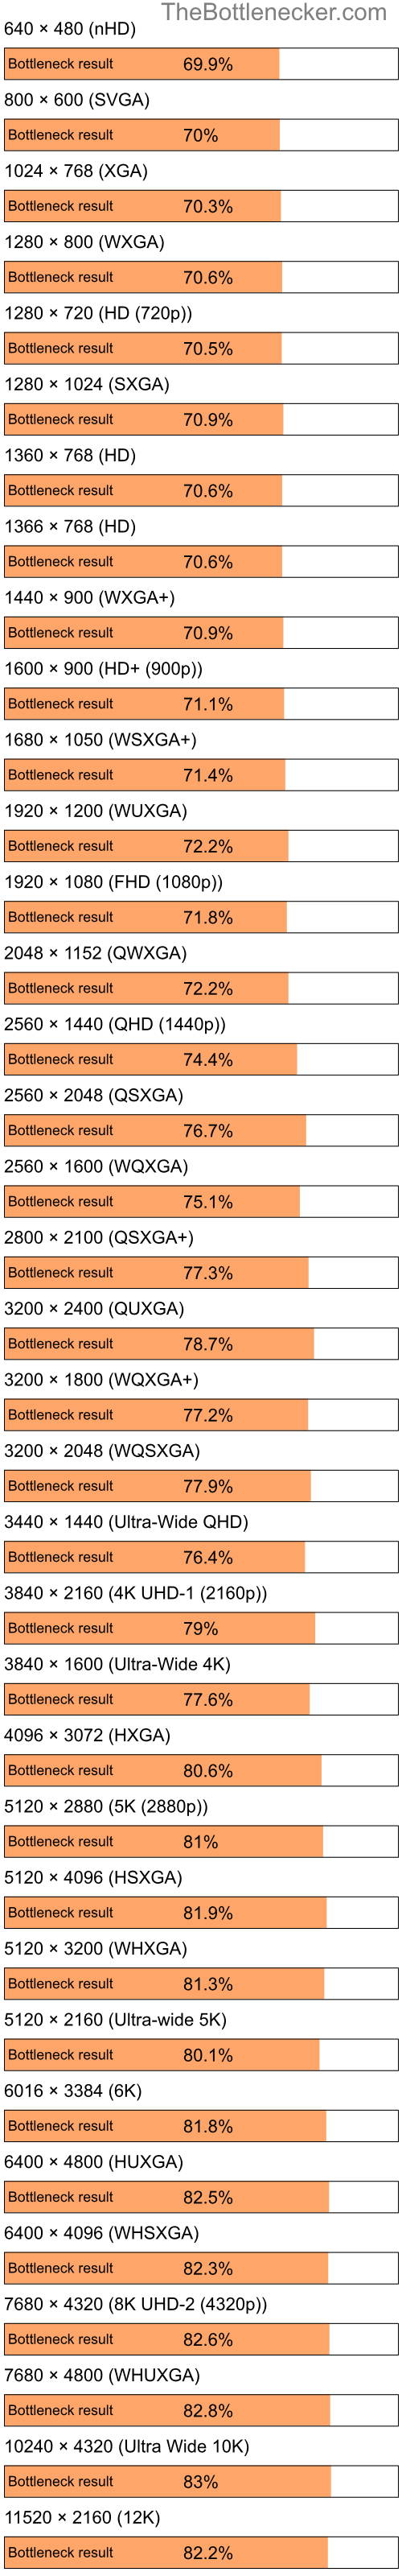 Bottleneck results by resolution for Intel Celeron and AMD Mobility Radeon HD 4225 in7 Days to Die